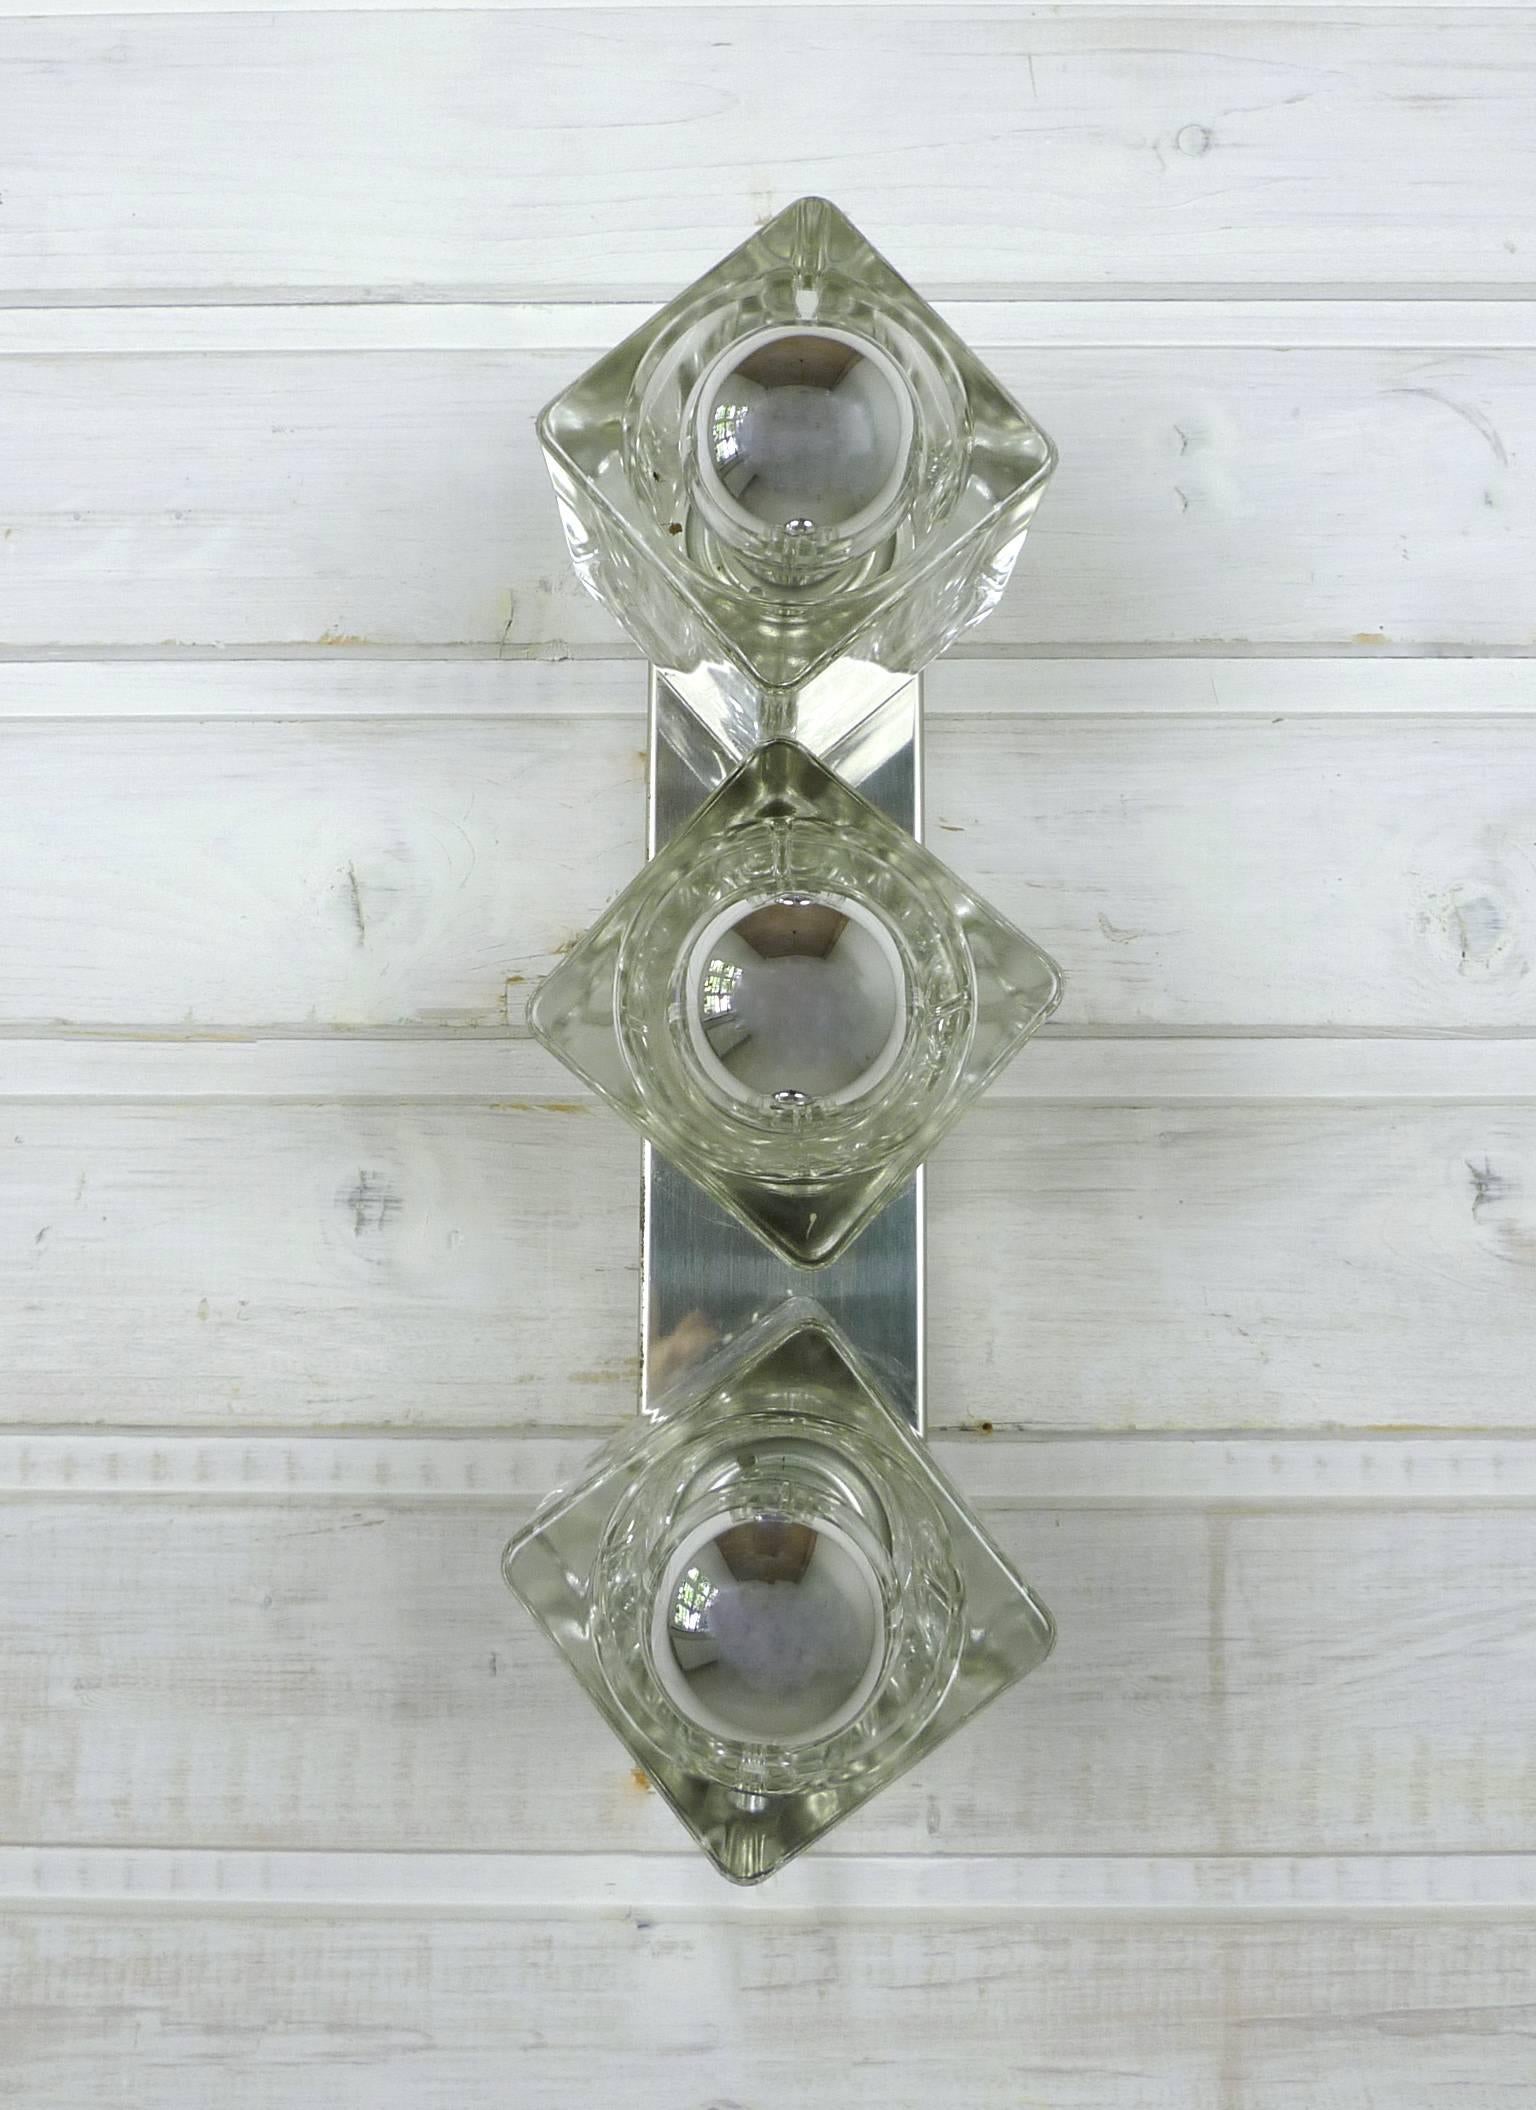 Wall light from the 1970s with three solid glass cubes on a polished metal rail. The wall light can be installed both horizontally and vertically. It is equipped with three E 14 sockets and is in a very good original condition.